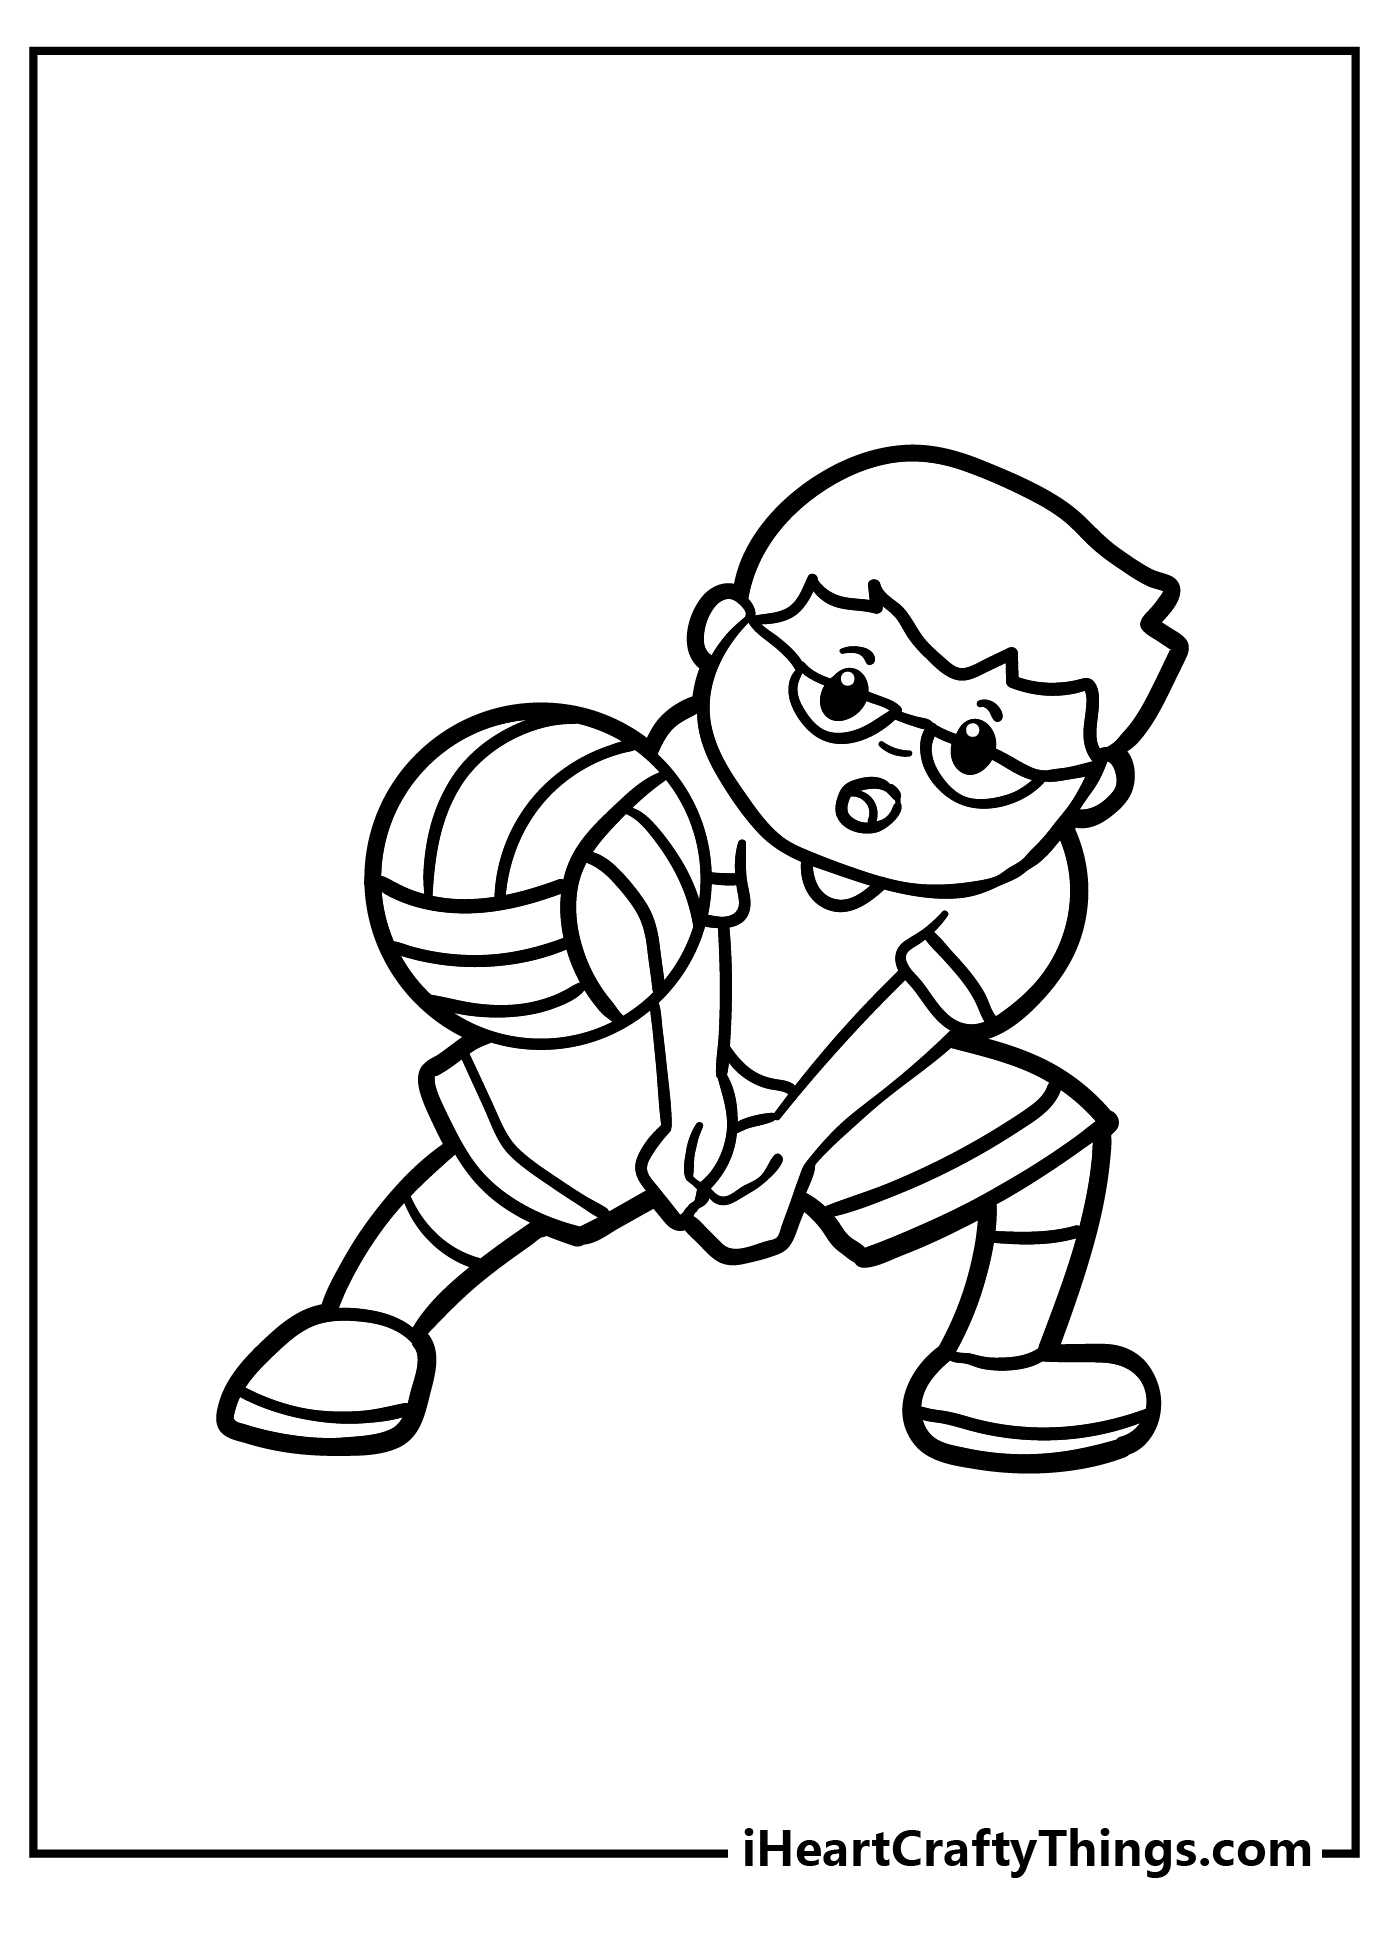 Volleyball Coloring Pages for adults free printable